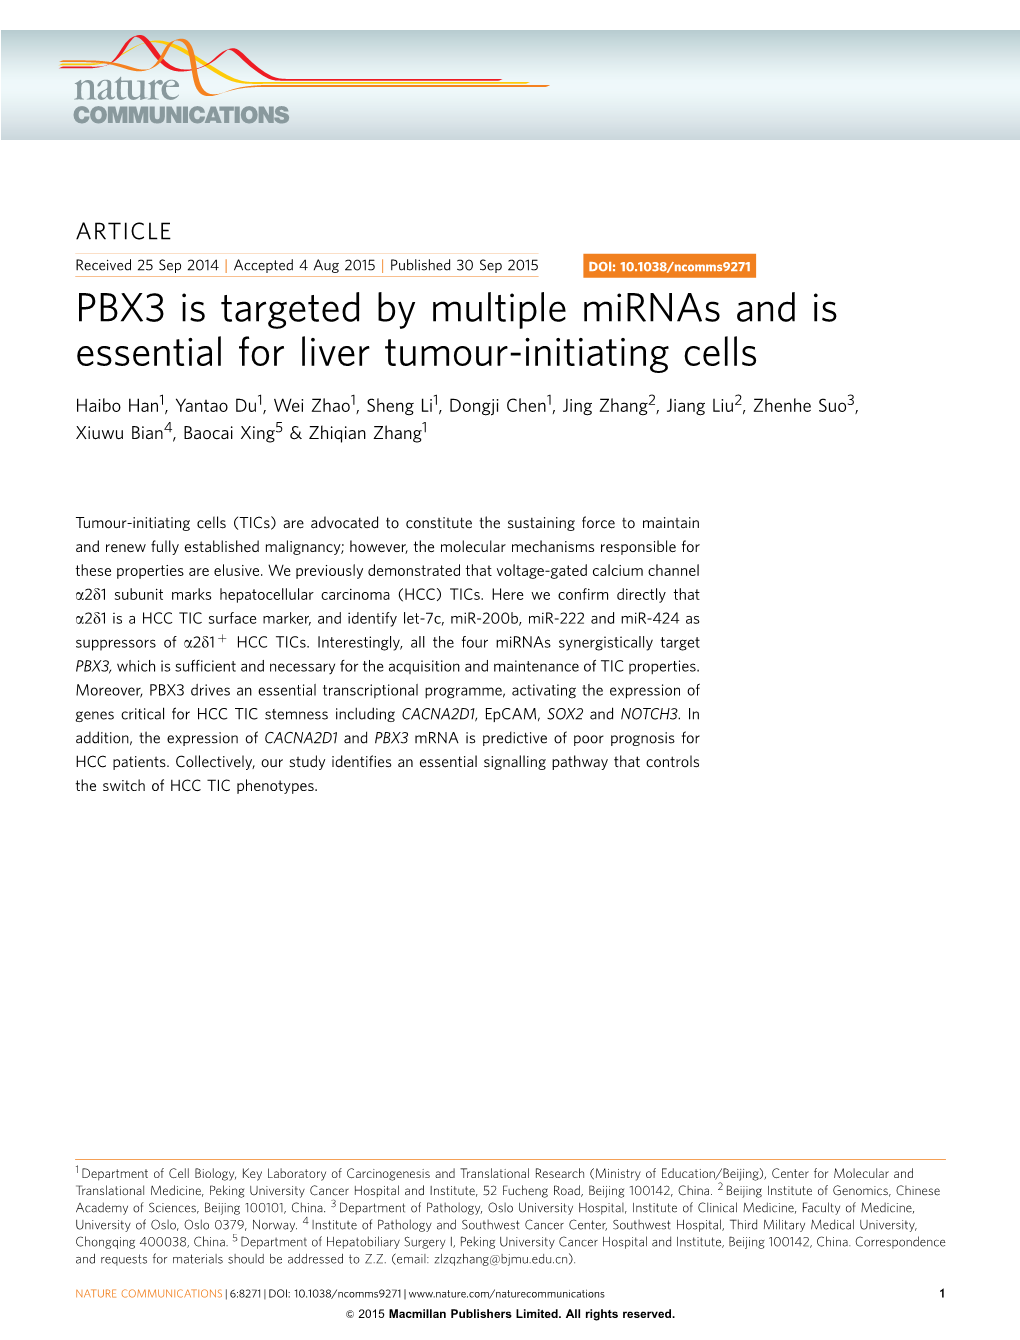 PBX3 Is Targeted by Multiple Mirnas and Is Essential for Liver Tumour-Initiating Cells